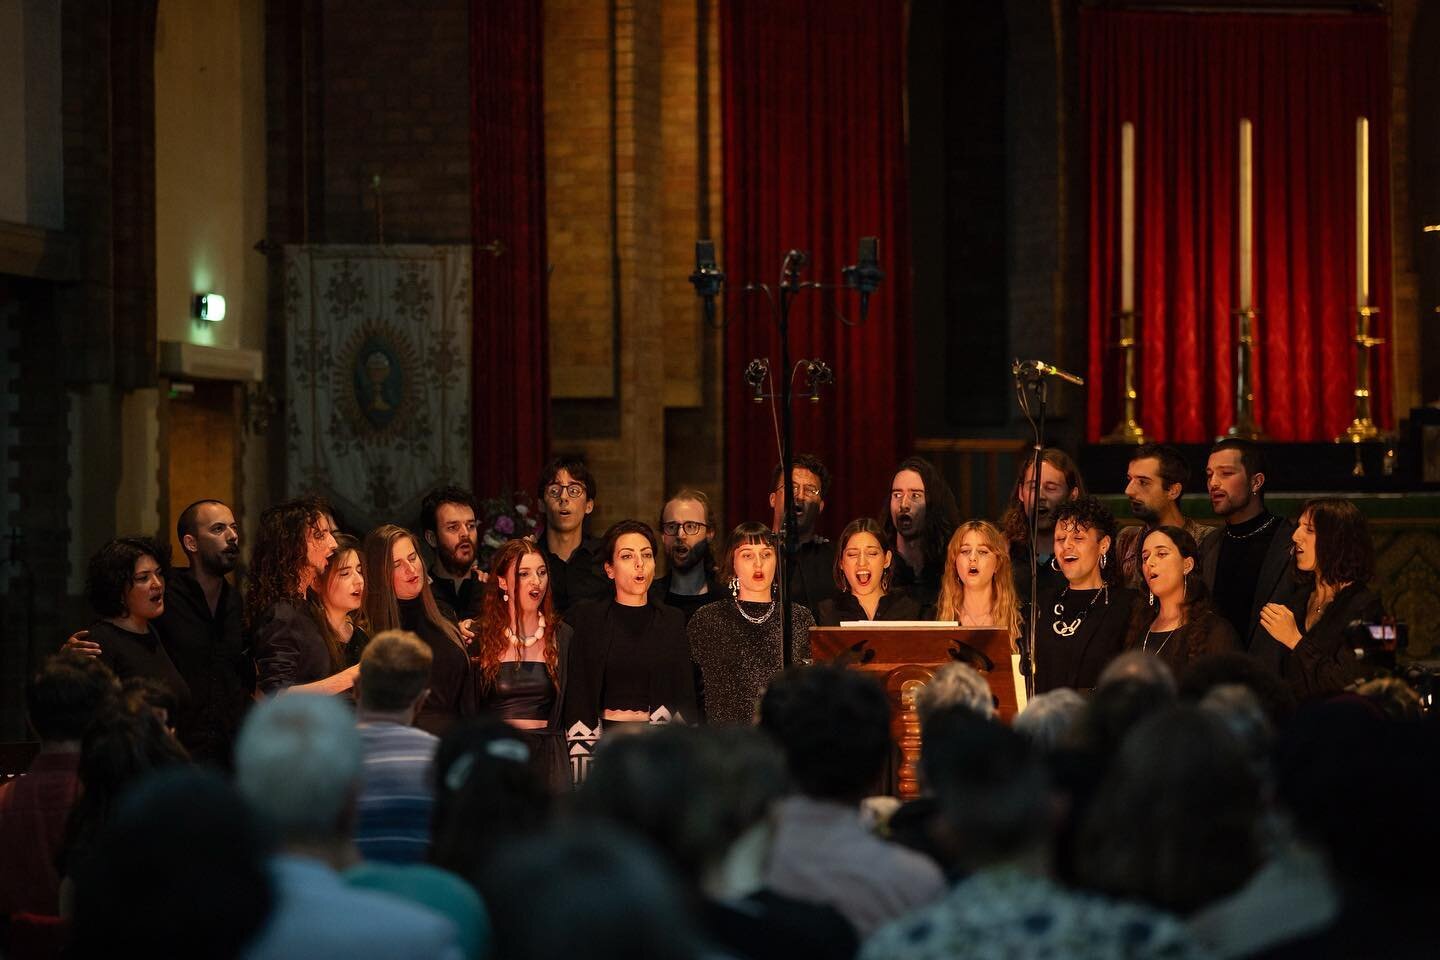 Thank you to everyone who made it to our debut London concert last month, you packed out the church!❣️

Keeps your eyes peeled, our journey has just begun&hellip;

Thank you @genvv for capturing the magic 📸

.
.
.

 #greekalleluia #medieval #medieva